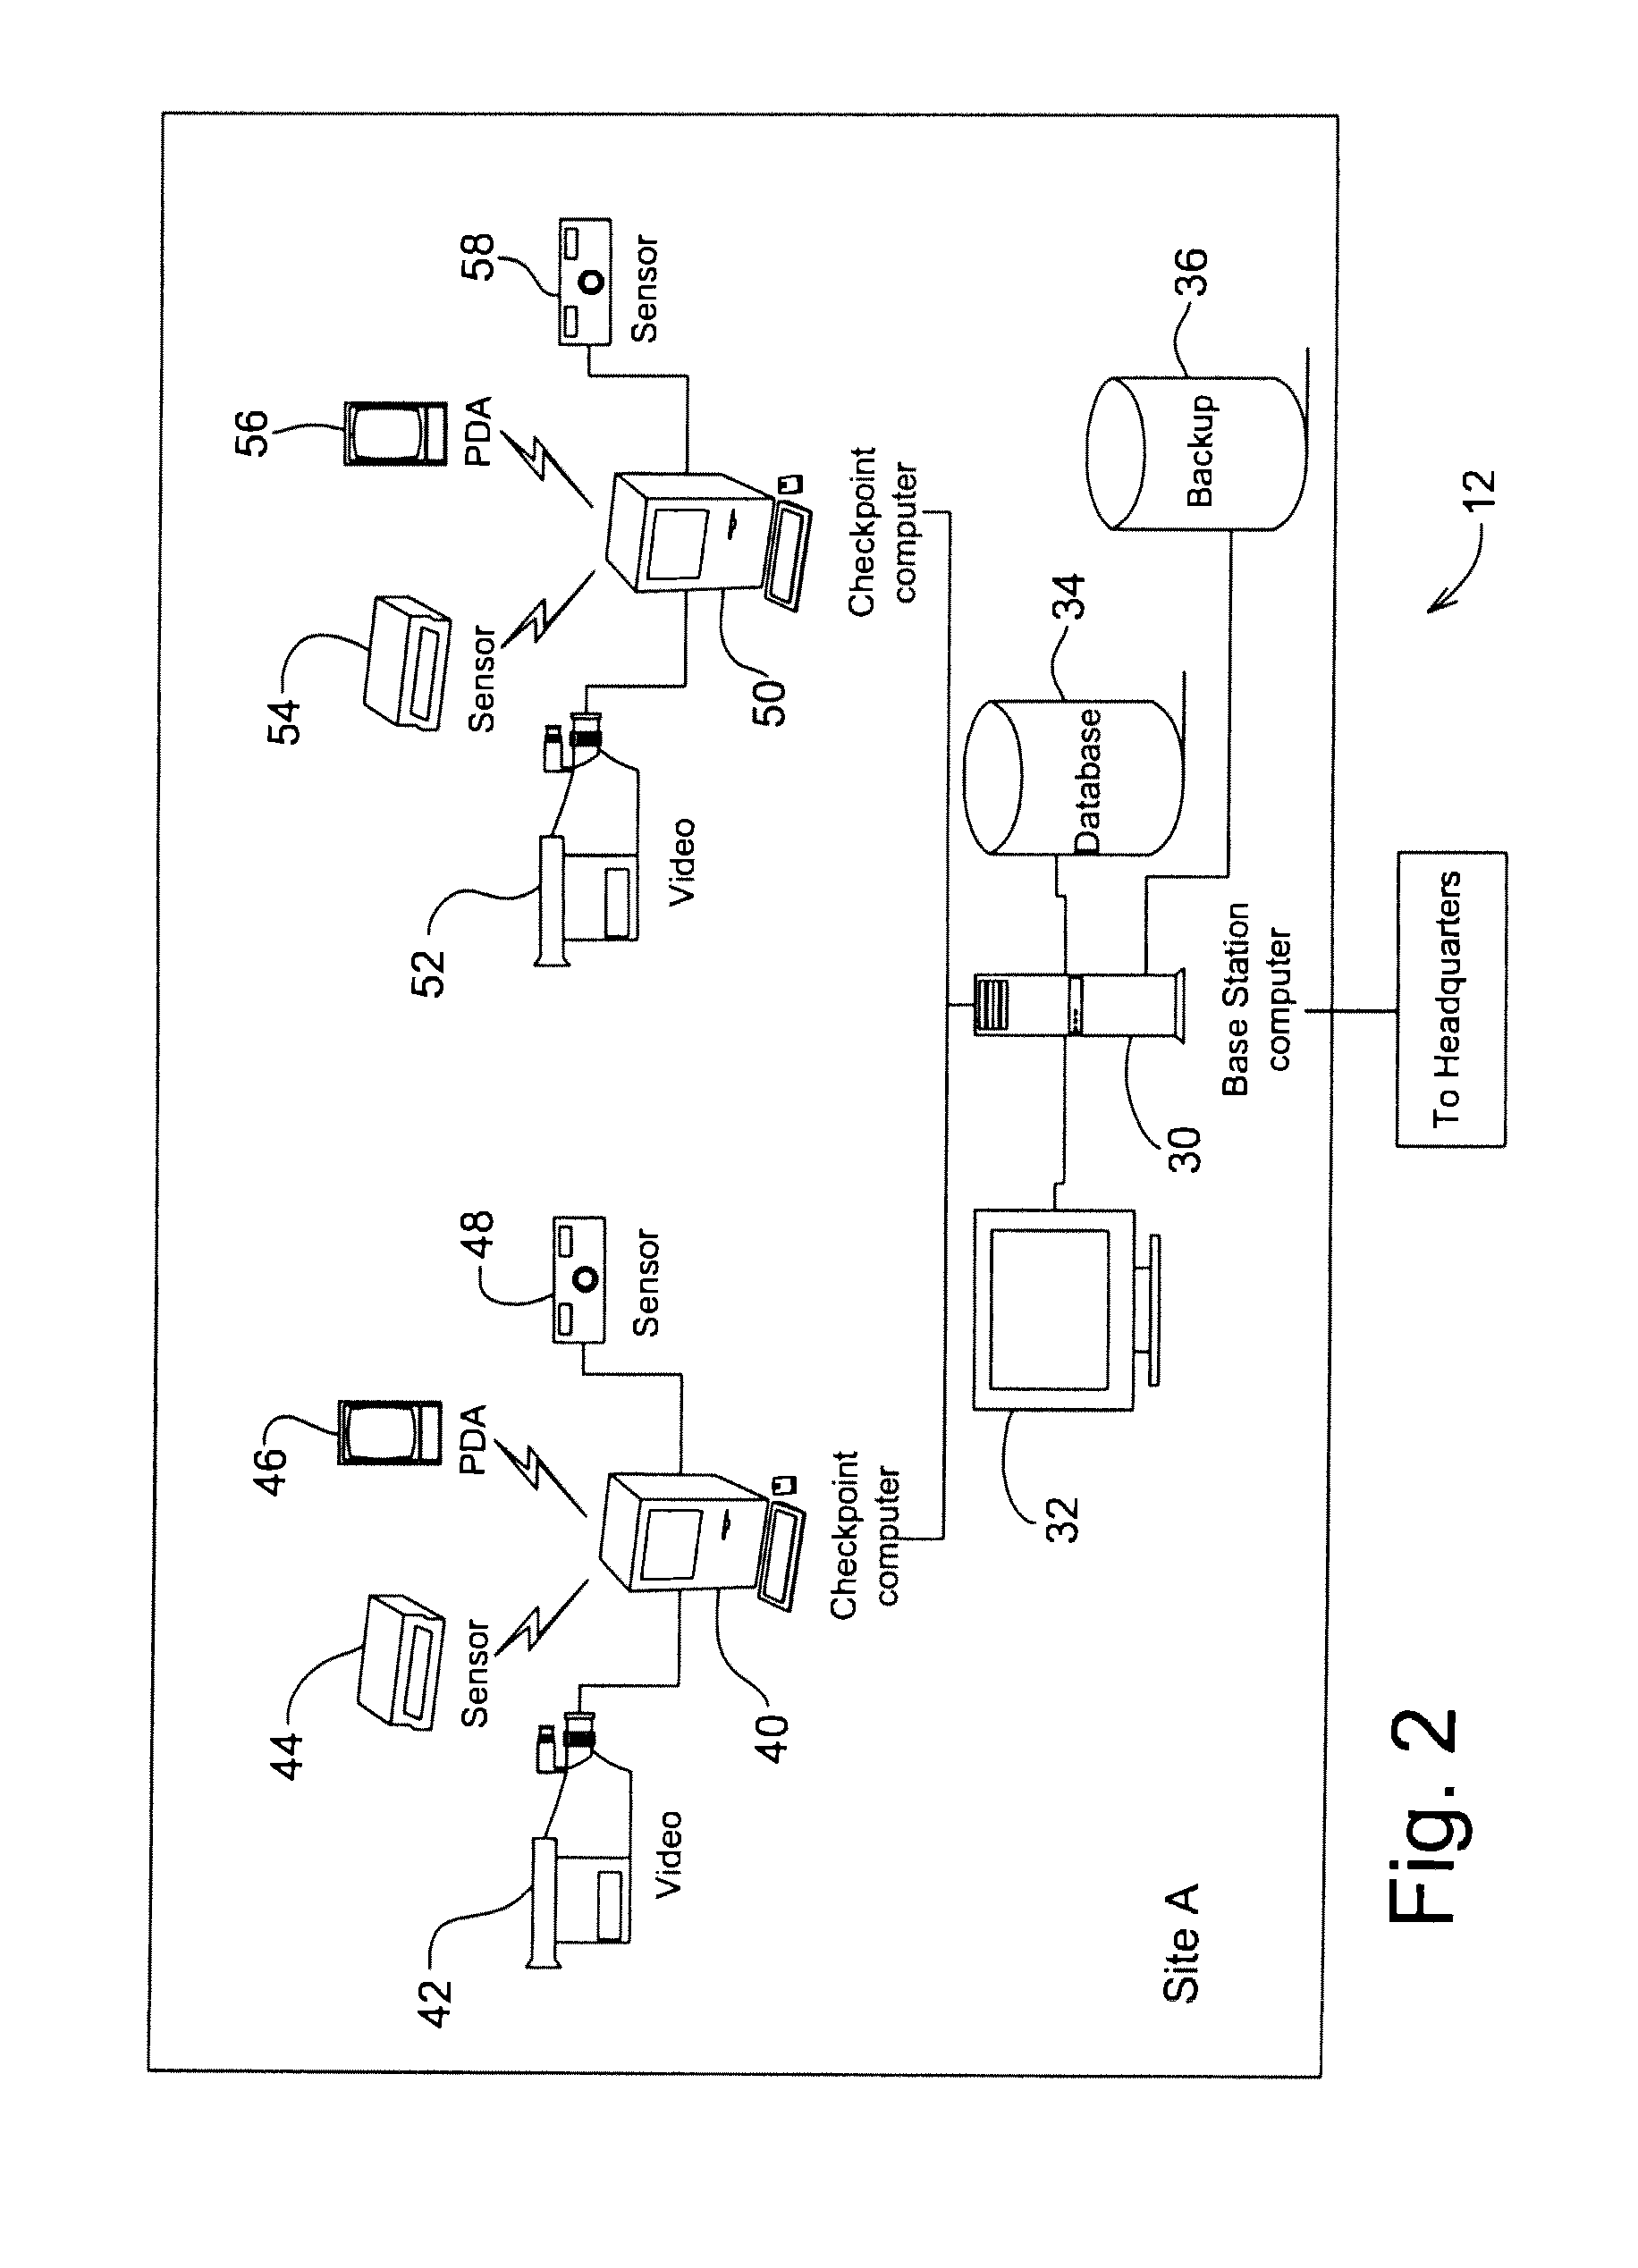 Method and protocol for real time security system